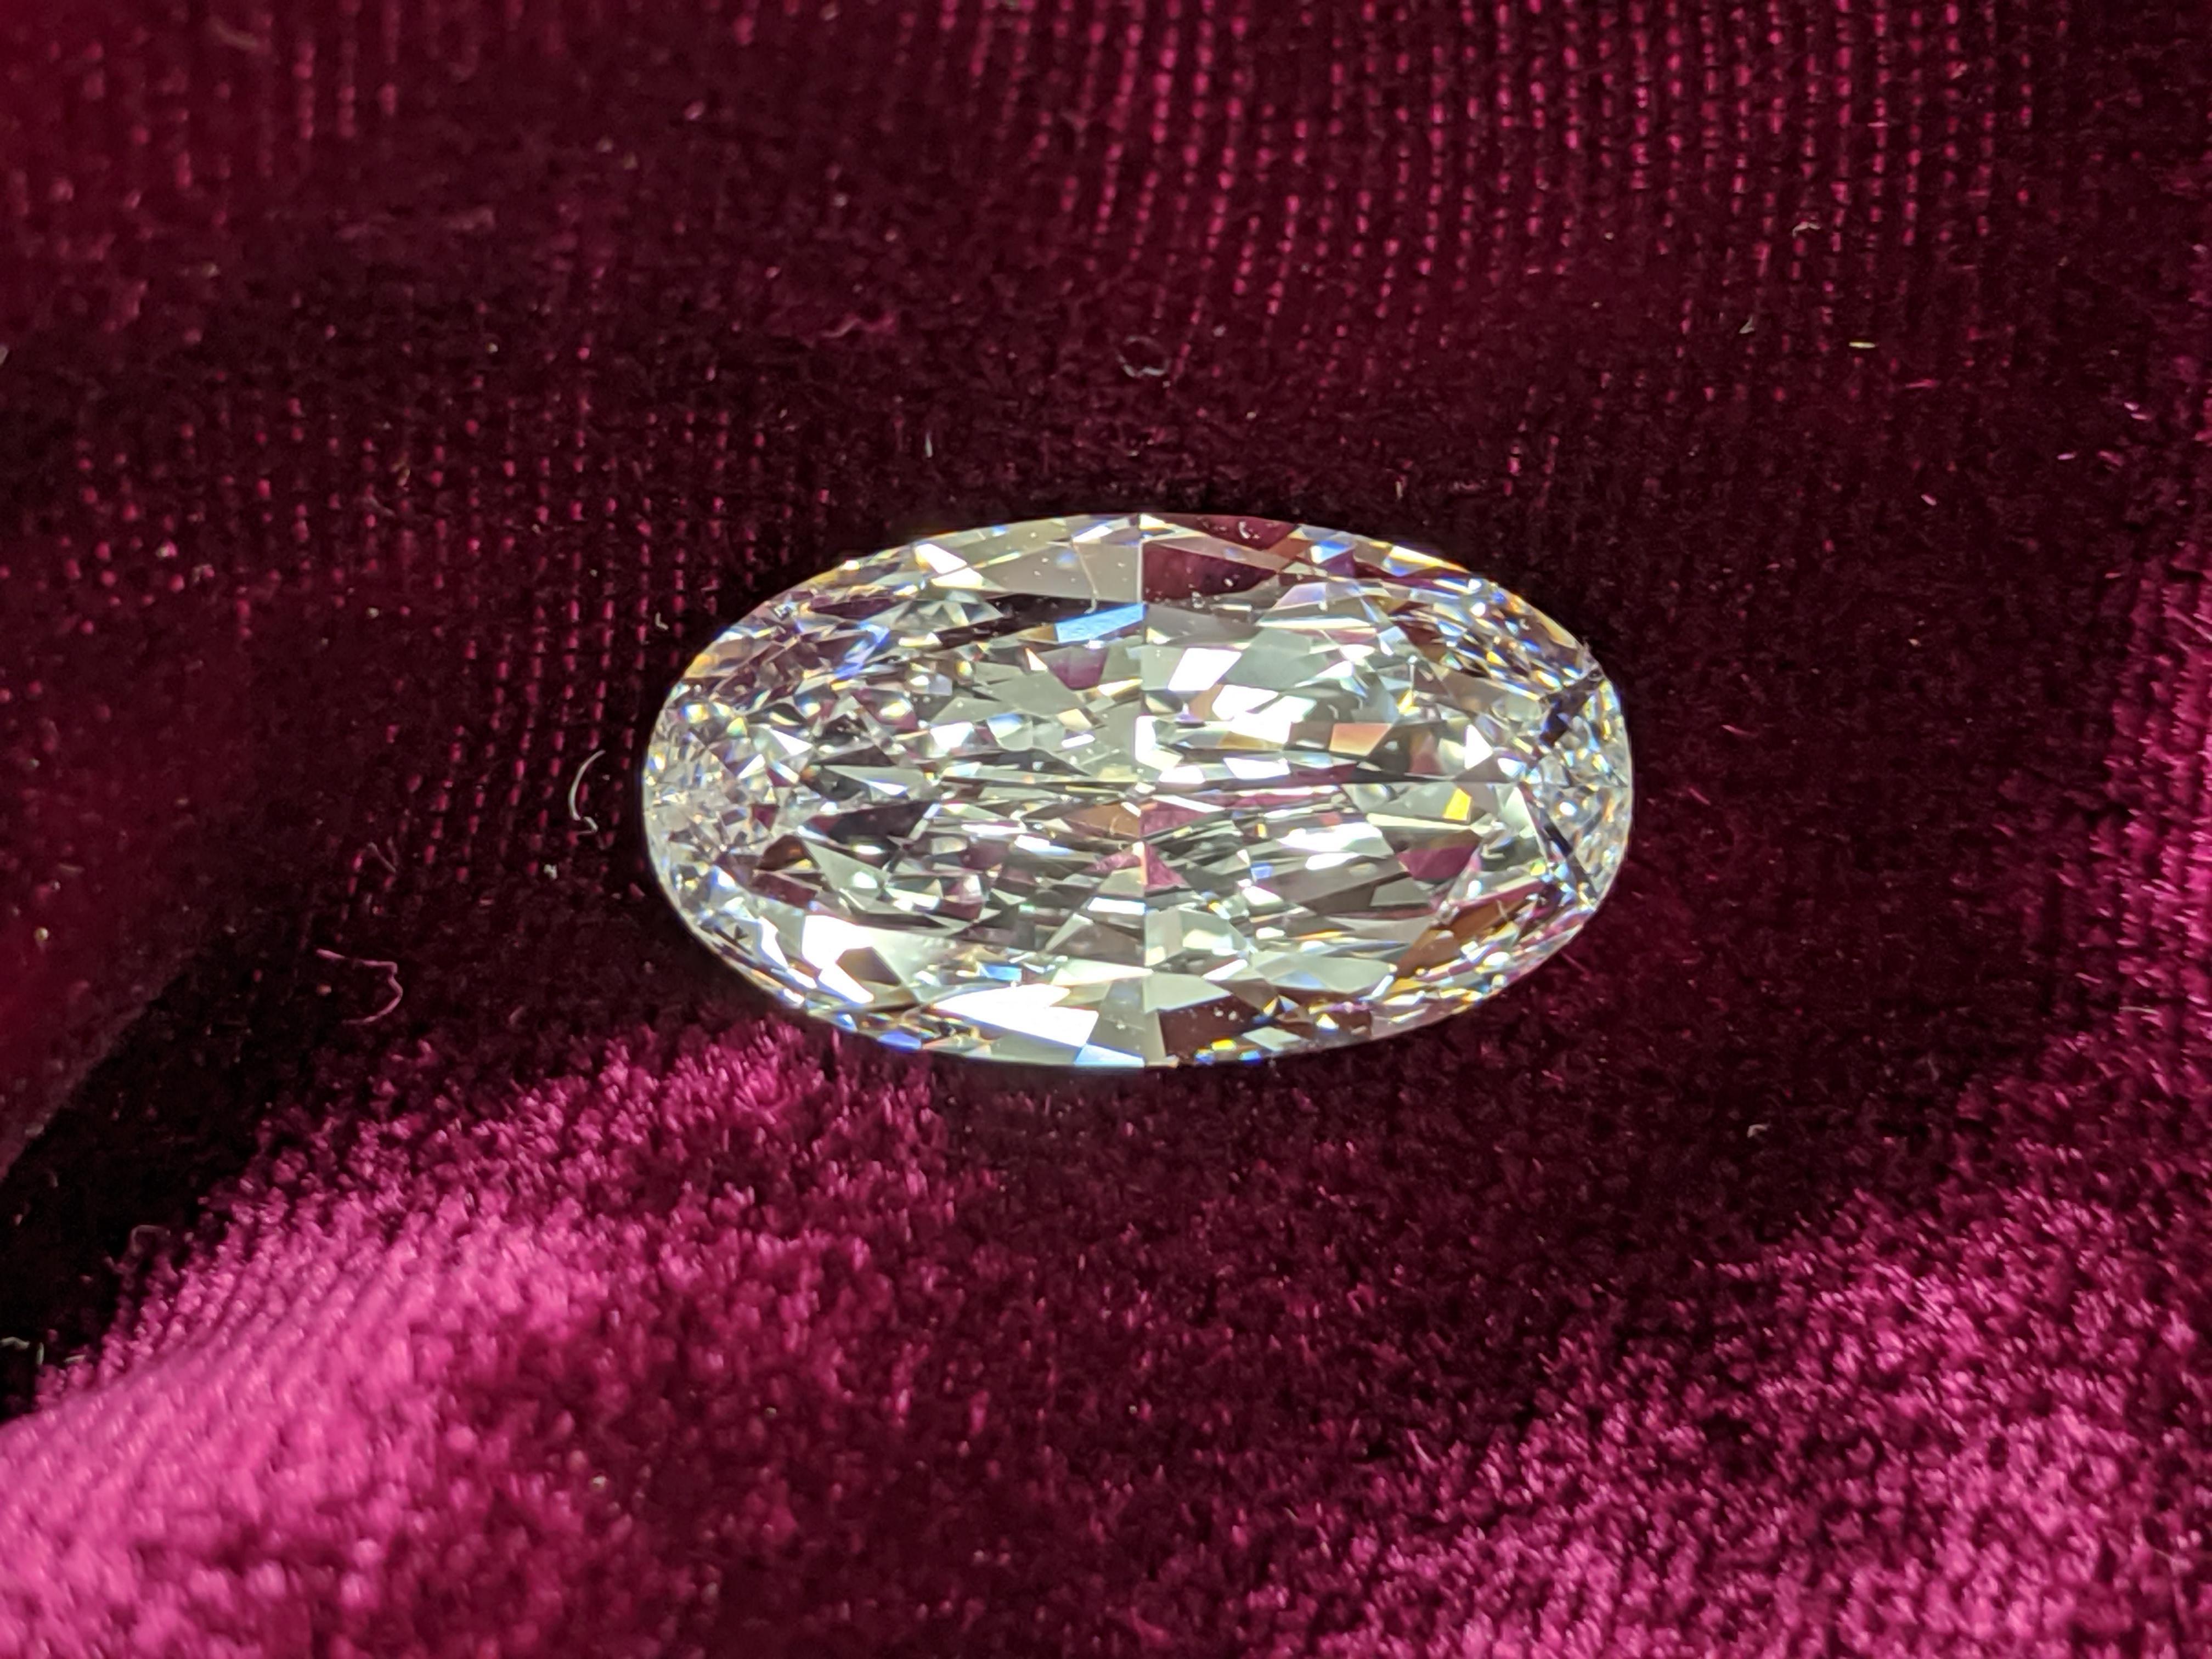 This exquisite Seven carat D color Internally Flawless Oval awaits your commission for the perfect ring or pendant.   Accompanied by GIA report #1216047088 this diamond measures 18.24 x 10.05mm and will make any high jewel project spectacular.

We